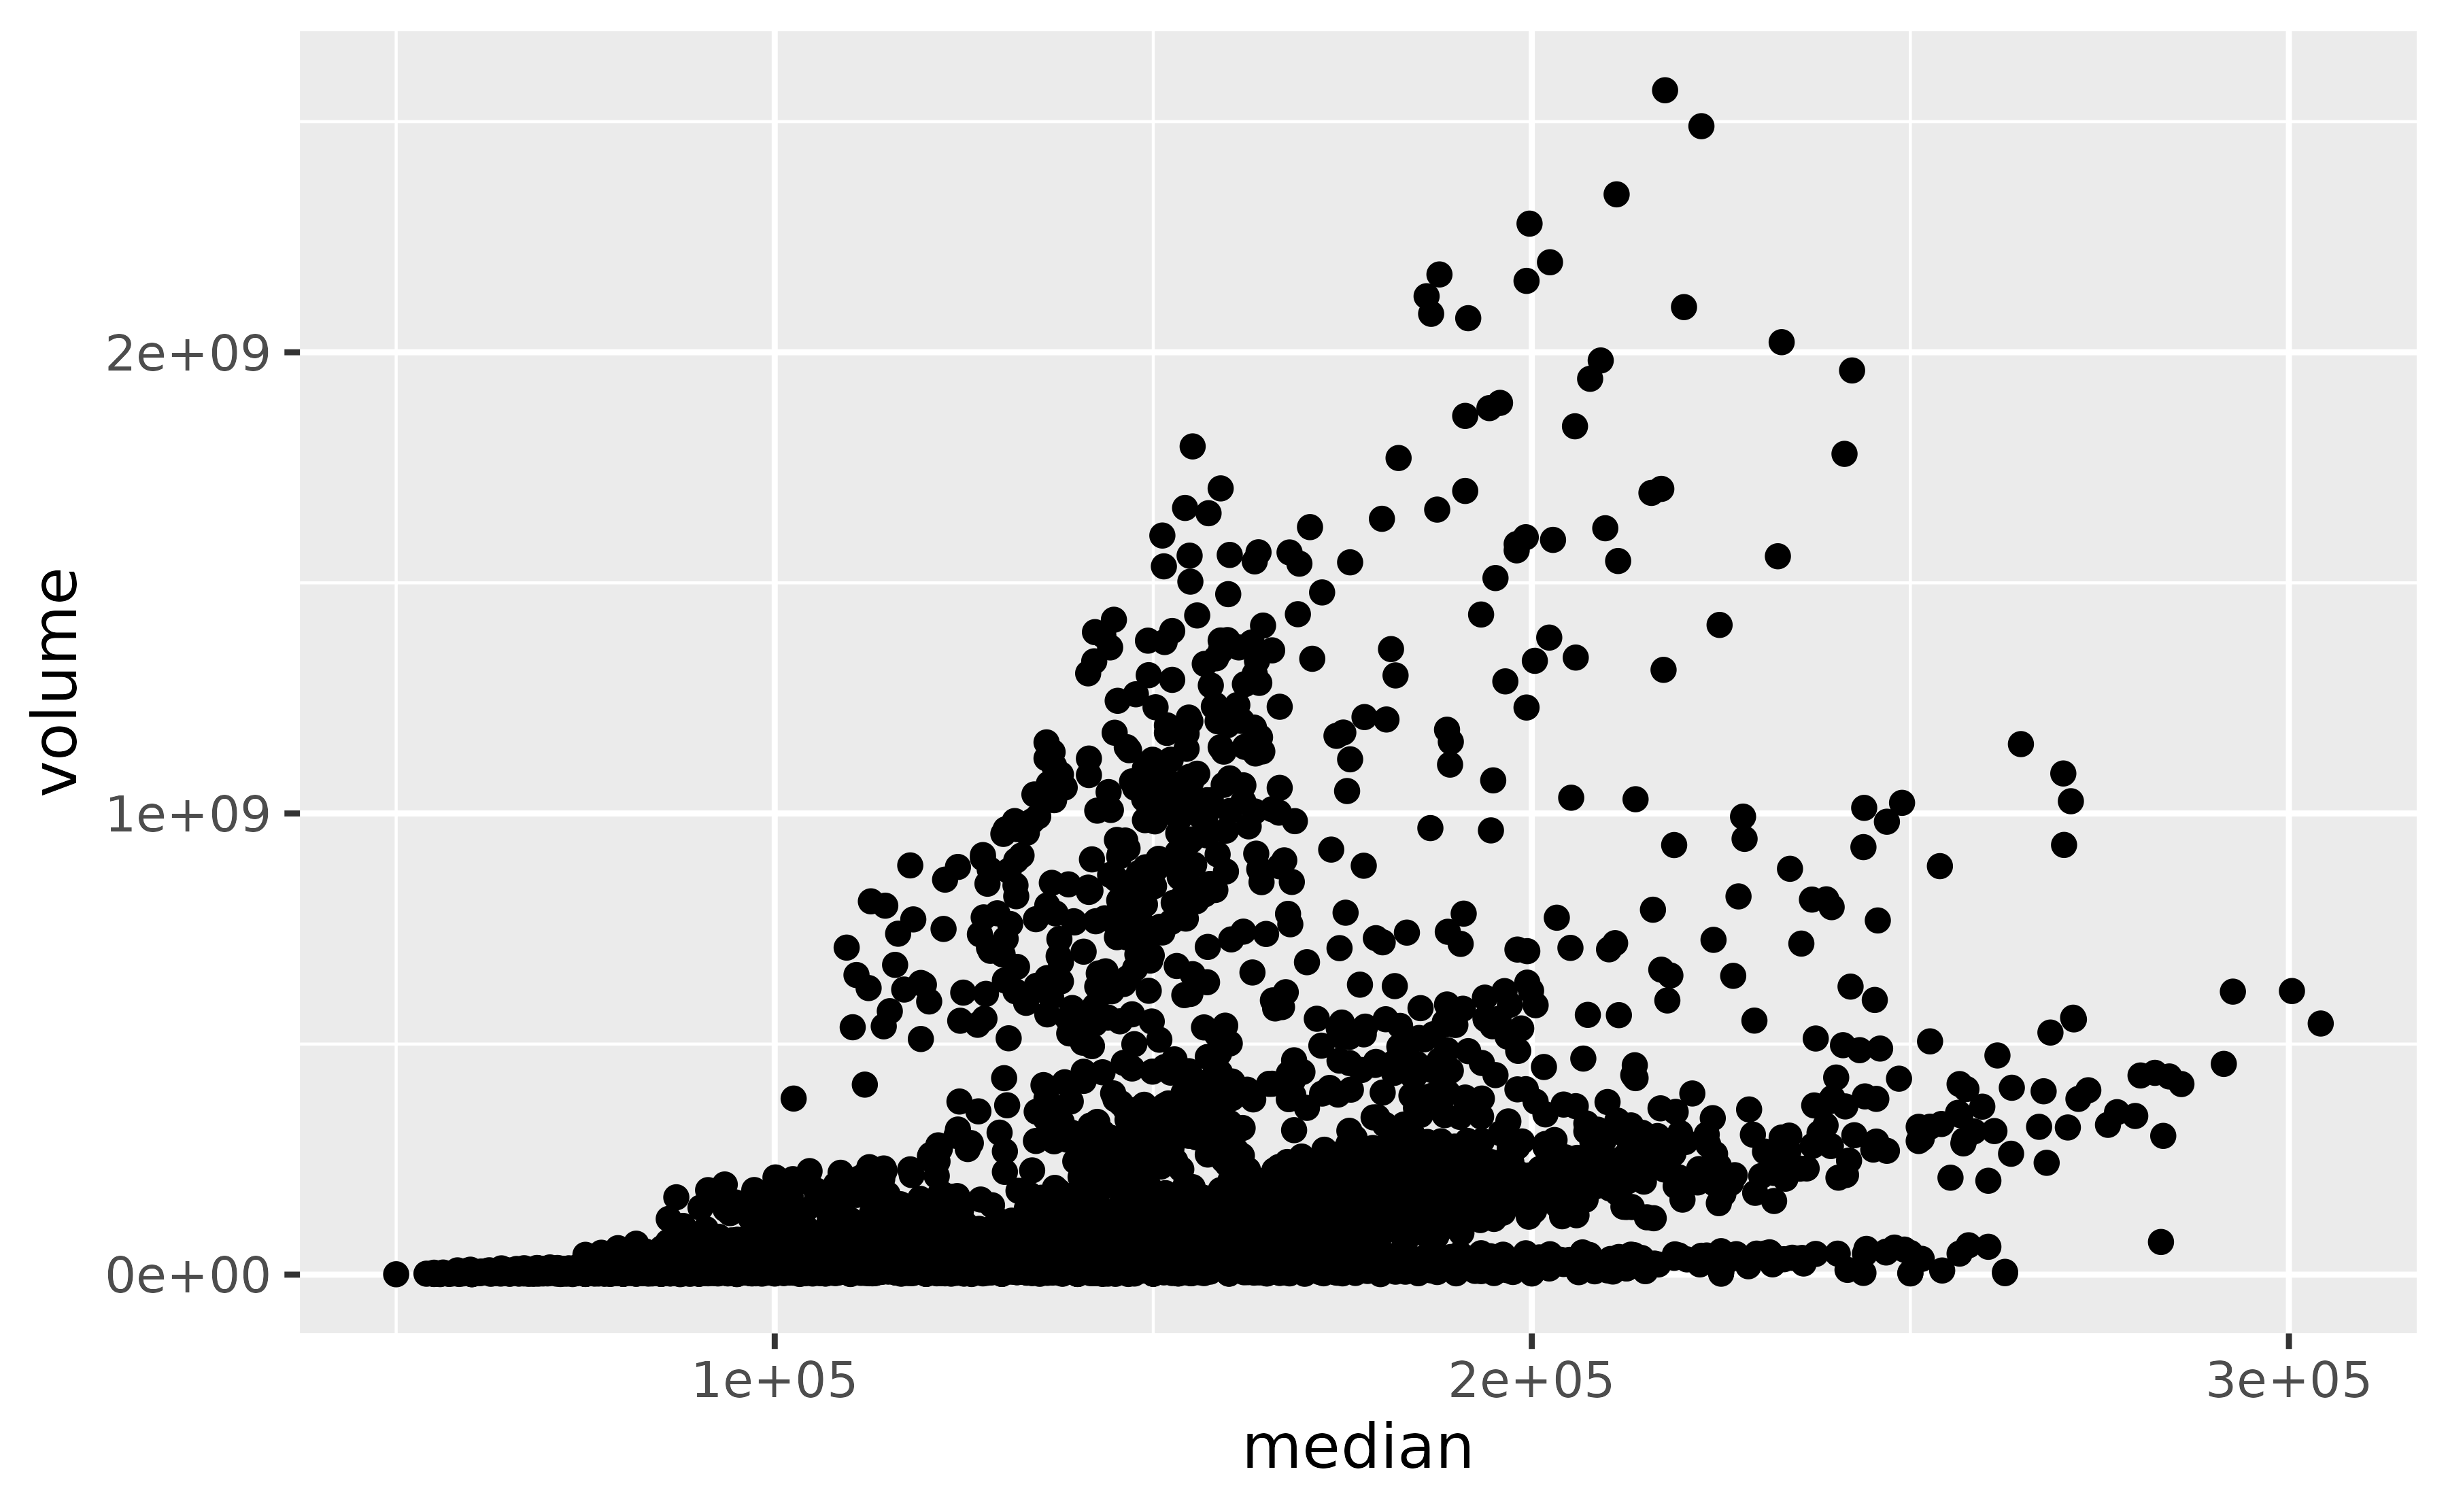 A scatter plot showing the median sale price of housing in Texas
 on the x-axis and the total volume of sales on the y-axis. The labels of
 both axes are in scientific notation, for example: '1e+09'.